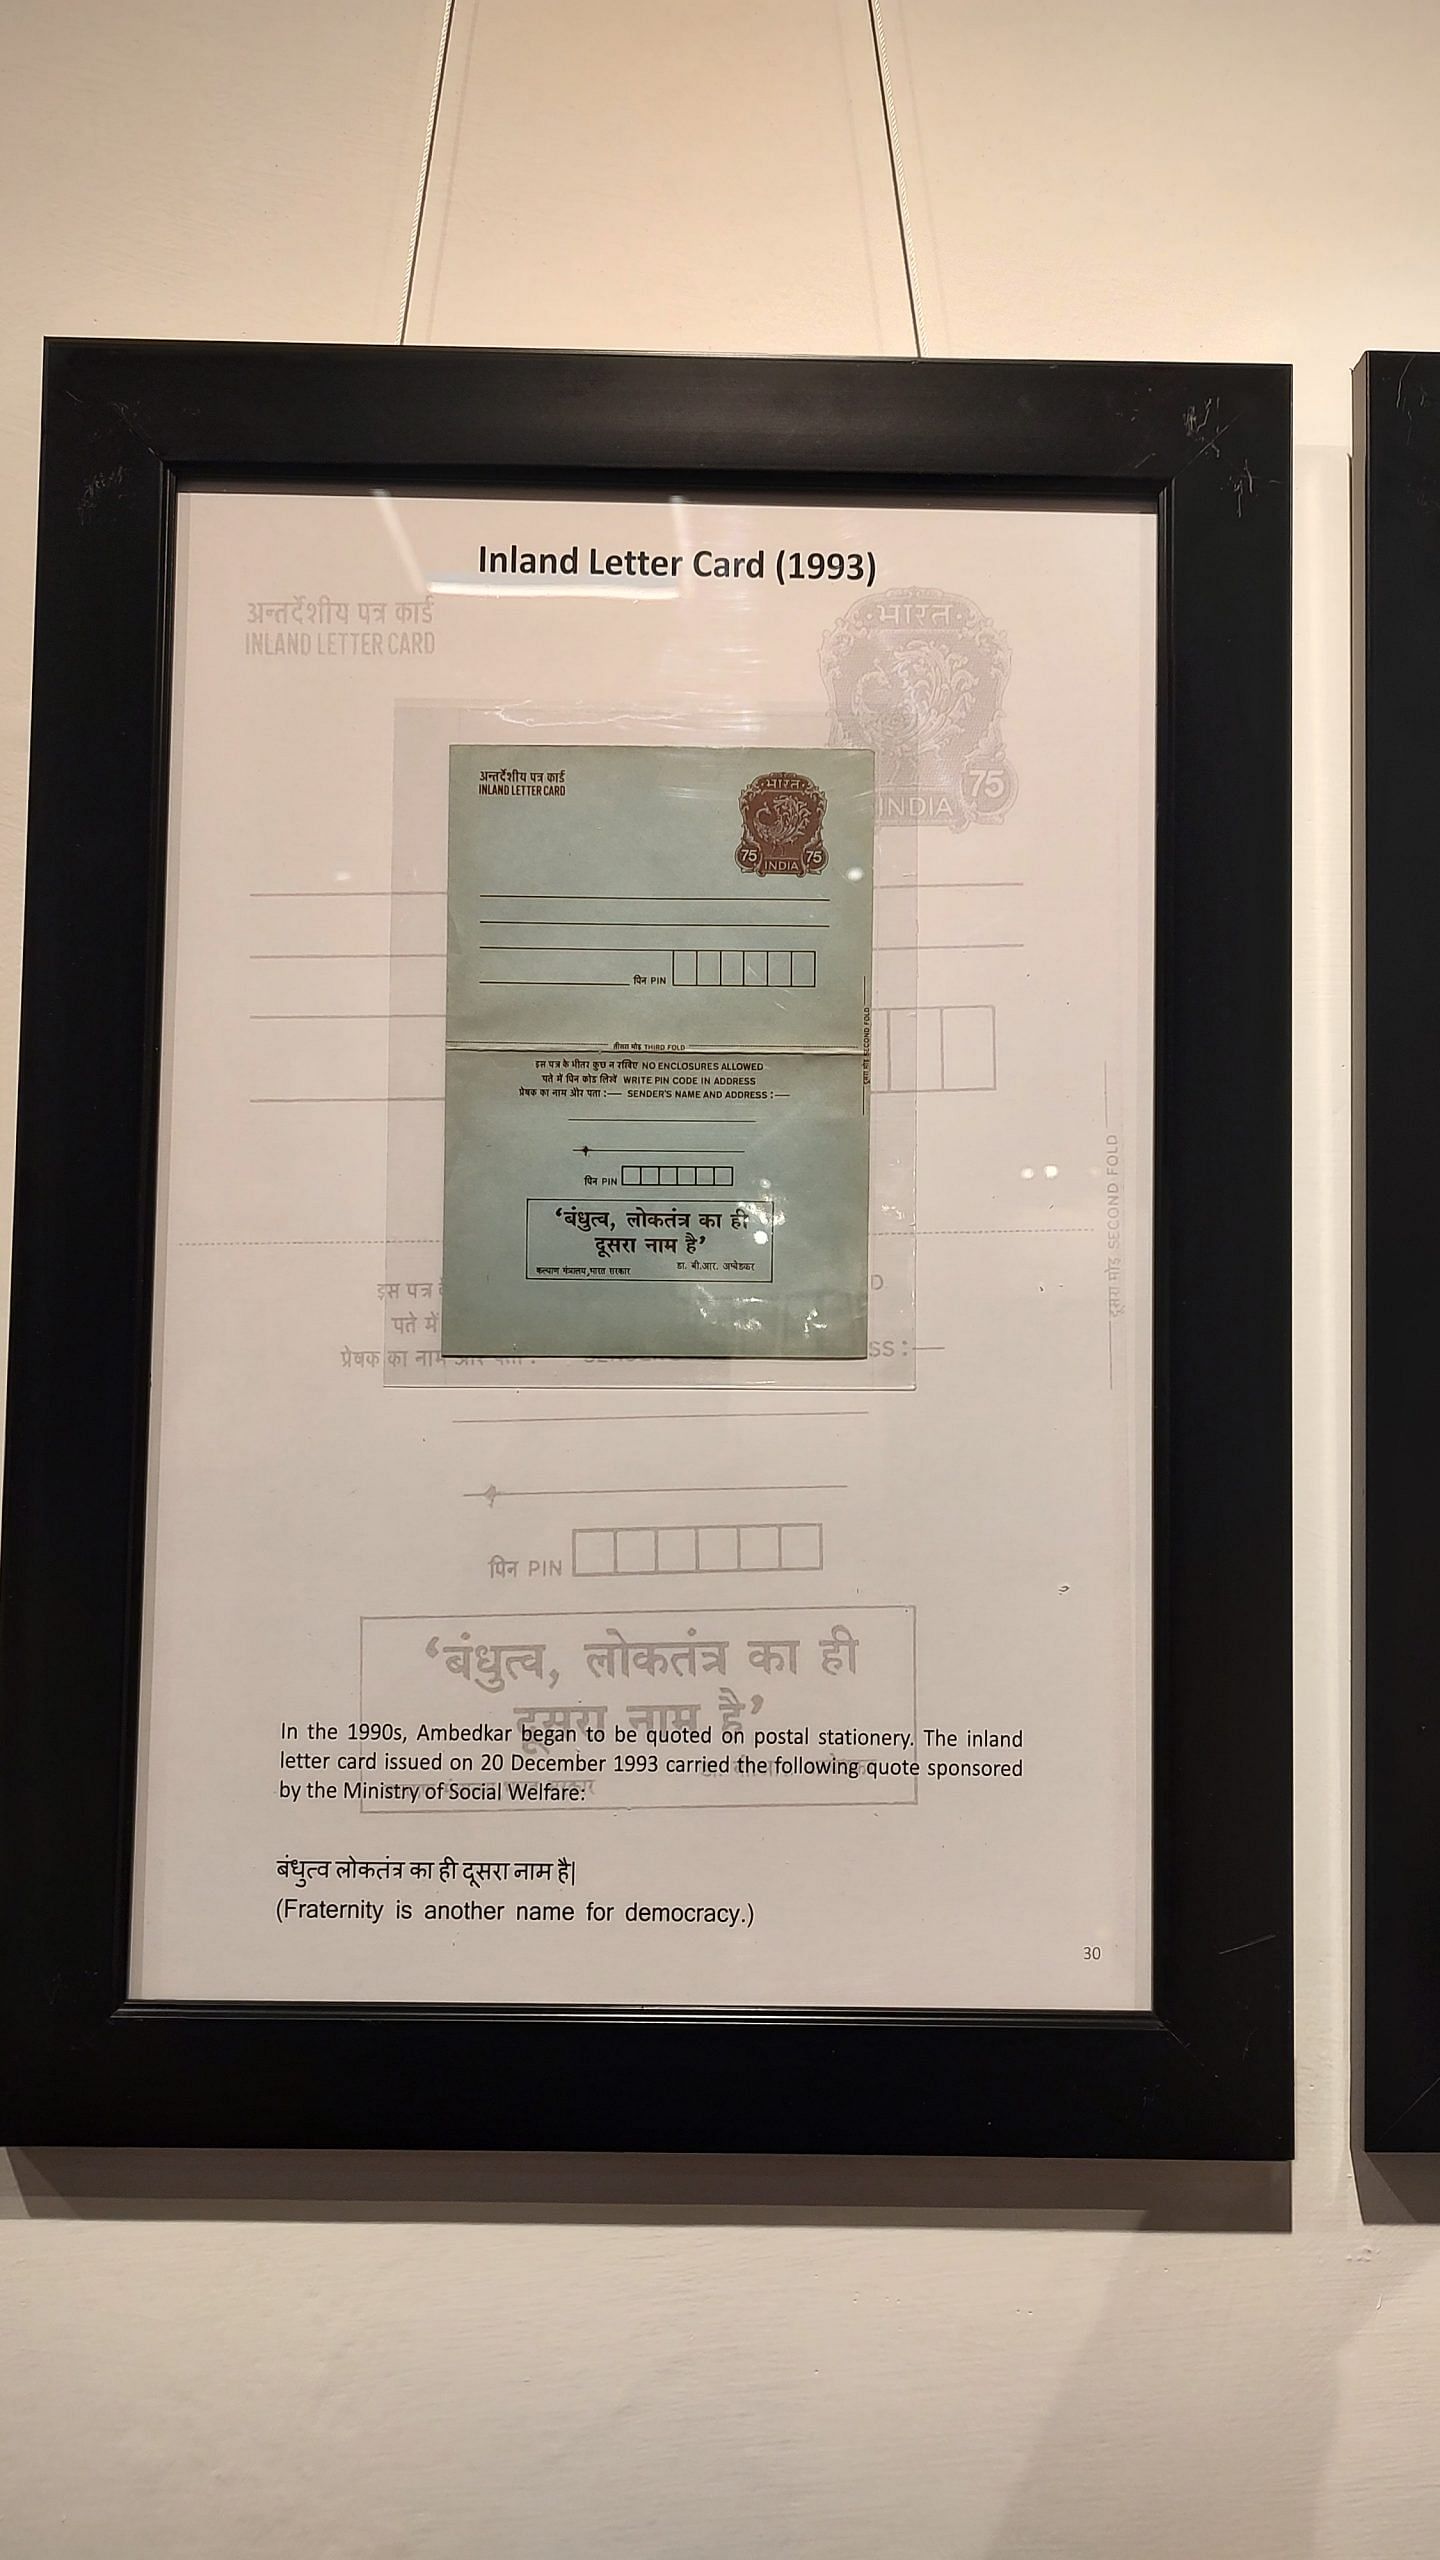 An image of the 1993 inland letter card, carrying Ambedkar's quote | Nidhima Taneja | ThePrint